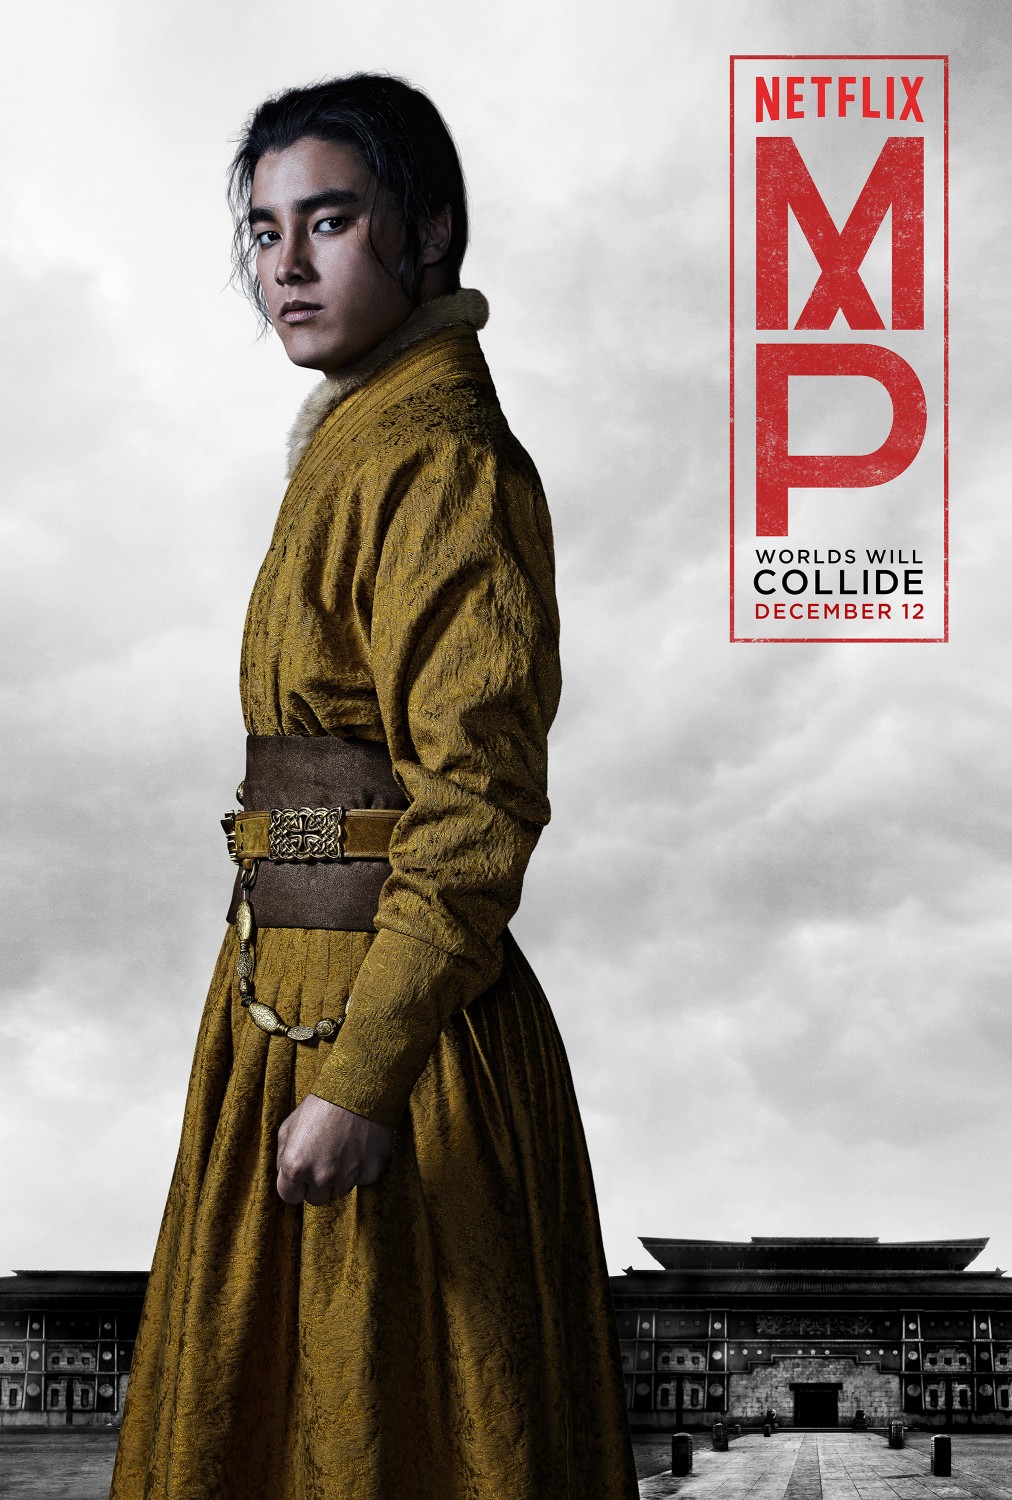 Extra Large TV Poster Image for Marco Polo (#9 of 12)